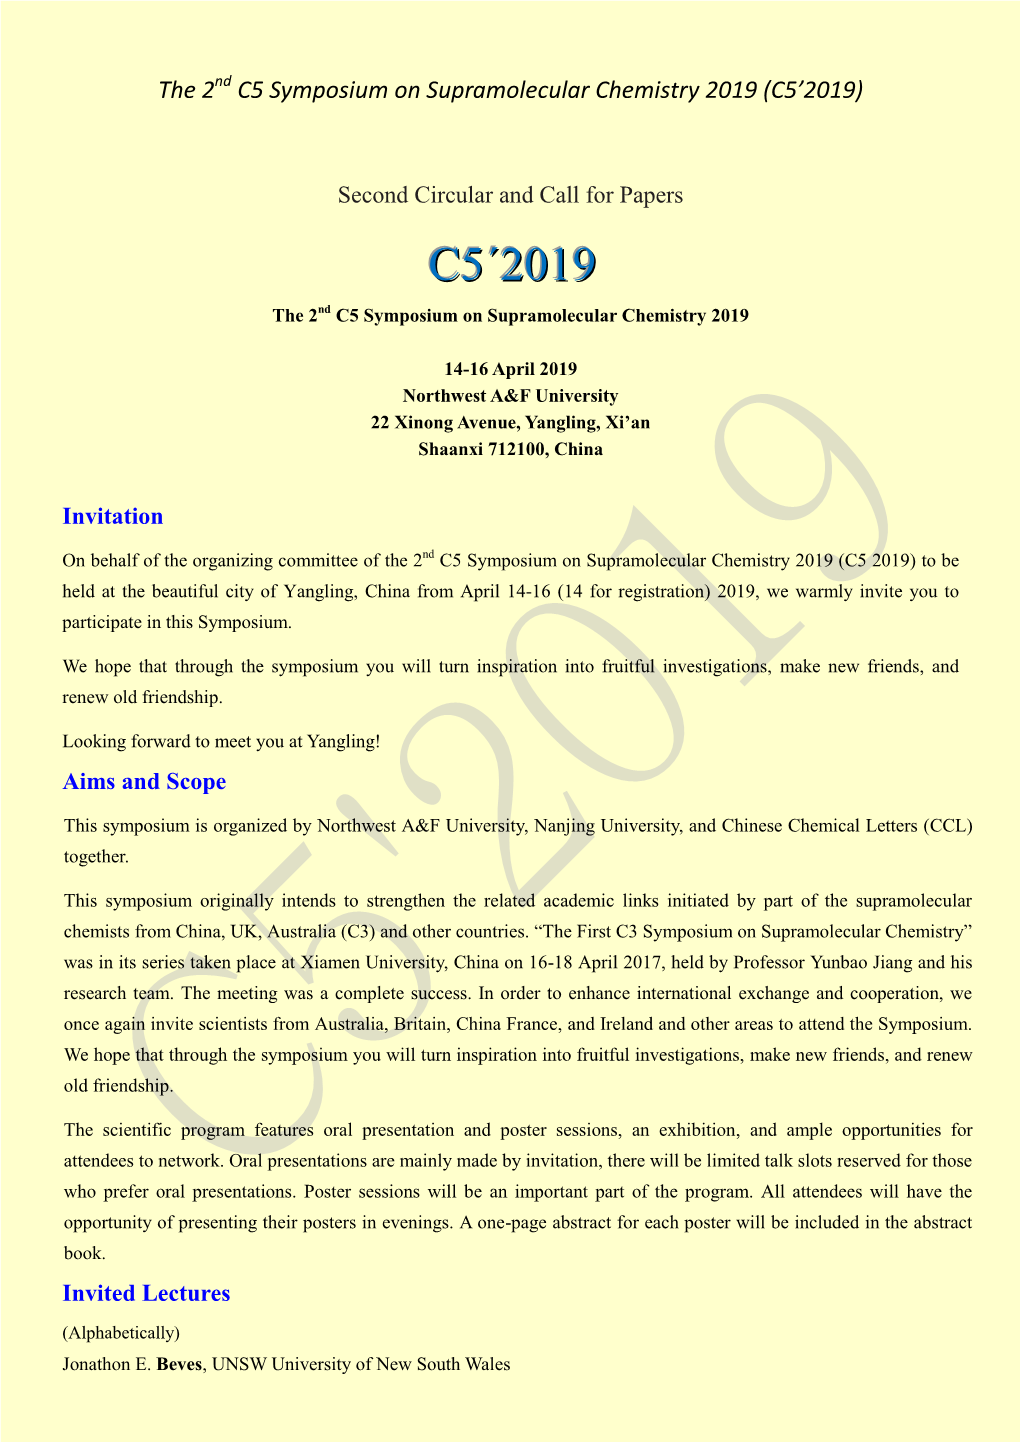 C5 2019) to Be Held at the Beautiful City of Yangling, China from April 14-16 (14 for Registration) 2019, We Warmly Invite You to Participate in This Symposium